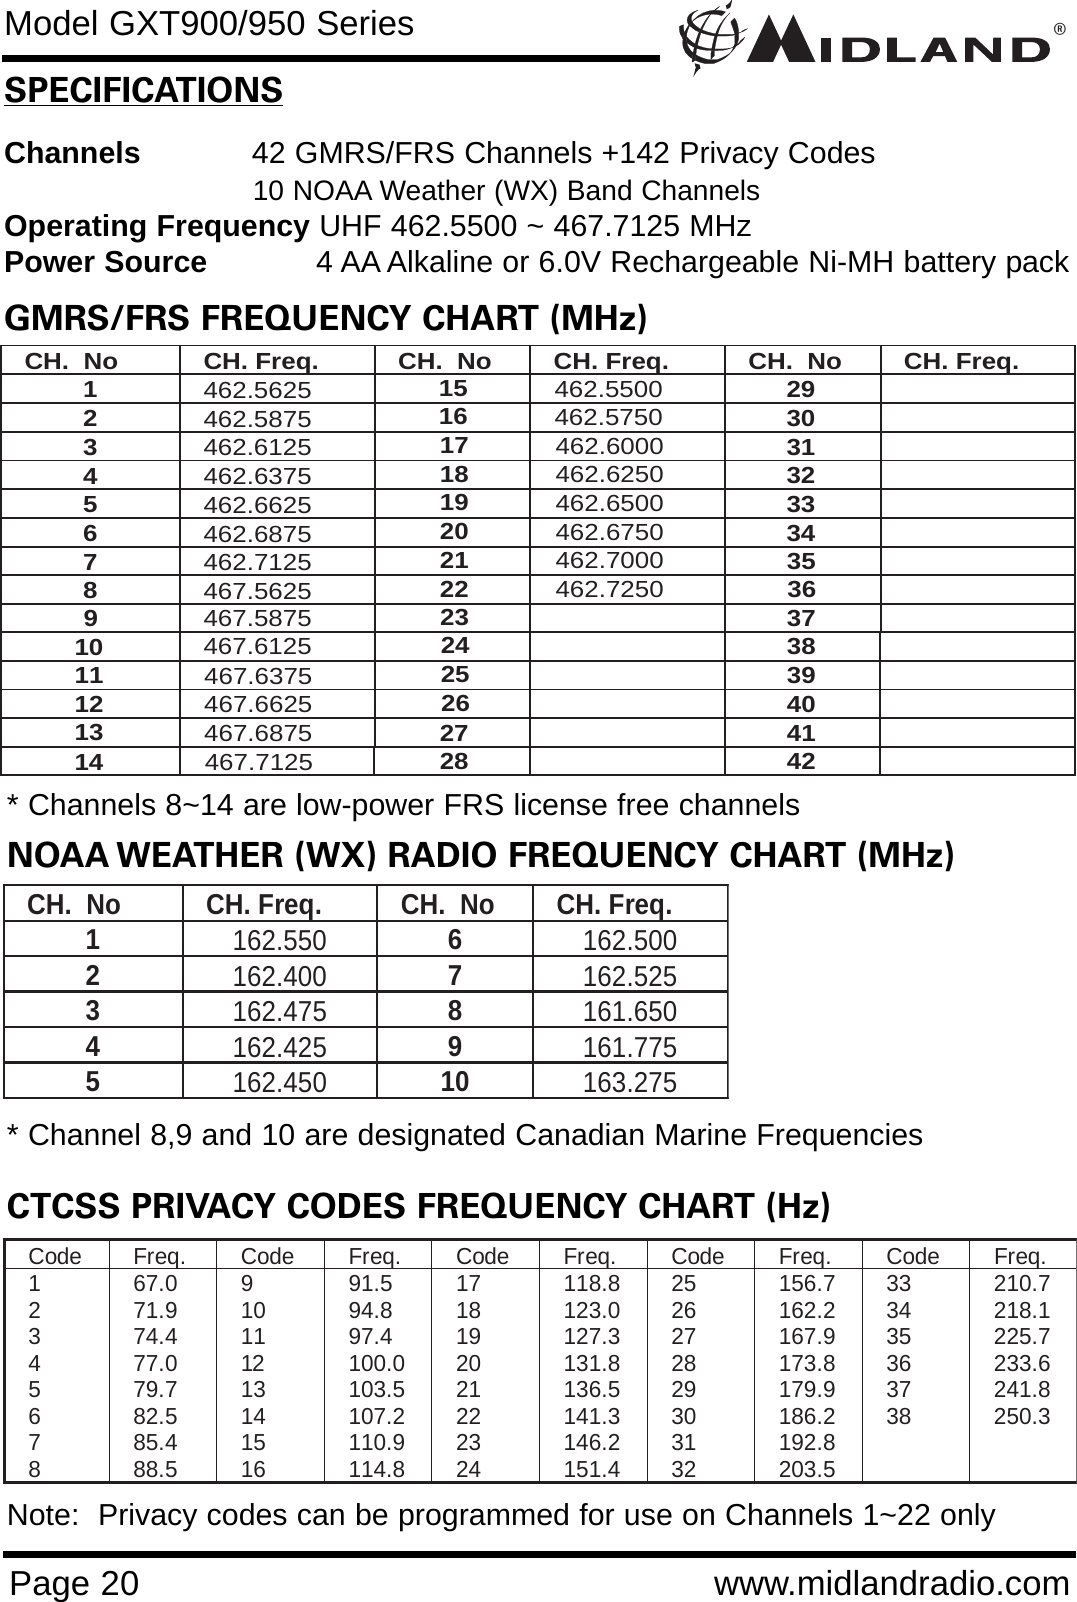 ®Page 20 www.midlandradio.comSPECIFICATIONSChannels 42 GMRS/FRS Channels +142 Privacy Codes10 NOAA Weather (WX) Band Channels Operating Frequency UHF 462.5500 ~ 467.7125 MHzPower Source 4 AA Alkaline or 6.0V Rechargeable Ni-MH battery packGMRS/FRS FREQUENCY CHART (MHz)CH.  No  CH. Freq.  CH.  No  CH. Freq.  CH.  No  CH. Freq. 1  462.5625 9 467.5875 17 462.6000 2  462.5875 10 467.6125 18 462.6250 3  462.6125 11 467.6375 19 462.6500 4  462.6375 12 467.6625 20 462.6750 5  462.6625 13 467.6875 21 462.7000 6  462.6875 14 467.7125 22 462.7250 7  462.7125 15 462.5500   8  467.5625 16 462.5750                                 2324252629303132333427283536      373839404142NOAA WEATHER (WX) RADIO FREQUENCY CHART (MHz)CH.  No  CH. Freq.  CH.  No  CH. Freq. 1  162.550 6  162.500 2  162.400 7  162.525 3  162.475 8  161.650 4  162.425 9  161.775 5  162.450 10  163.275 CTCSS PRIVACY CODES FREQUENCY CHART (Hz)Code Freq.  Code Freq.  Code Freq.  Code Freq.  Code Freq.  1  67.0 9  91.5 17  118.8 25  156.7 33  210.7 2  71.9 10  94.8 18  123.0 26  162.2 34  218.1 3  74.4 11  97.4 19  127.3 27  167.9 35  225.7 4 77.0 12 100.0 20  131.8 28  173.8 36  233.6 5 79.7 13 103.5 21  136.5 29  179.9 37  241.8 6 82.5 14 107.2 22  141.3 30  186.2 38  250.3 7 85.4 15 110.9 23  146.2 31  192.8    8 88.5 16 114.8 24  151.4 32  203.5    * Channel 8,9 and 10 are designated Canadian Marine Frequencies* Channels 8~14 are low-power FRS license free channelsNote:  Privacy codes can be programmed for use on Channels 1~22 onlyModel GXT900/950 Series